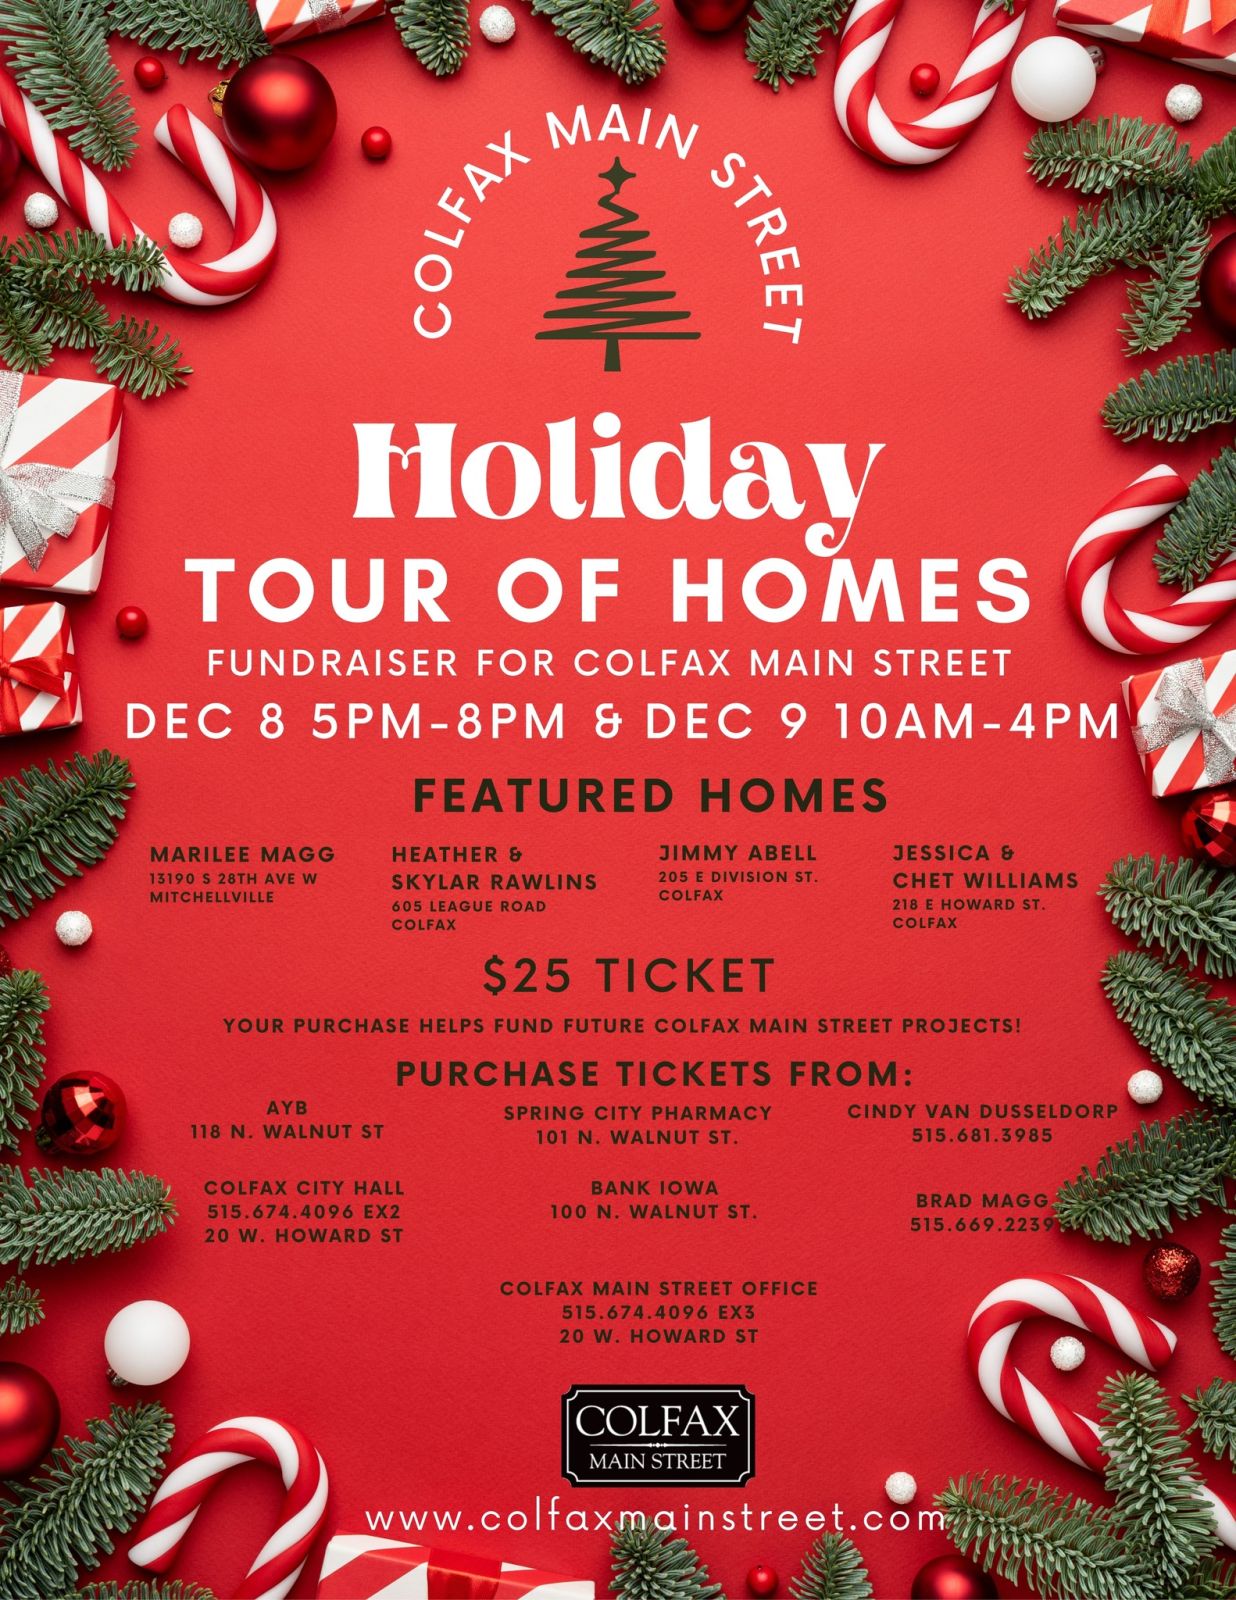 Event Promo Photo For Holiday Tour of Homes